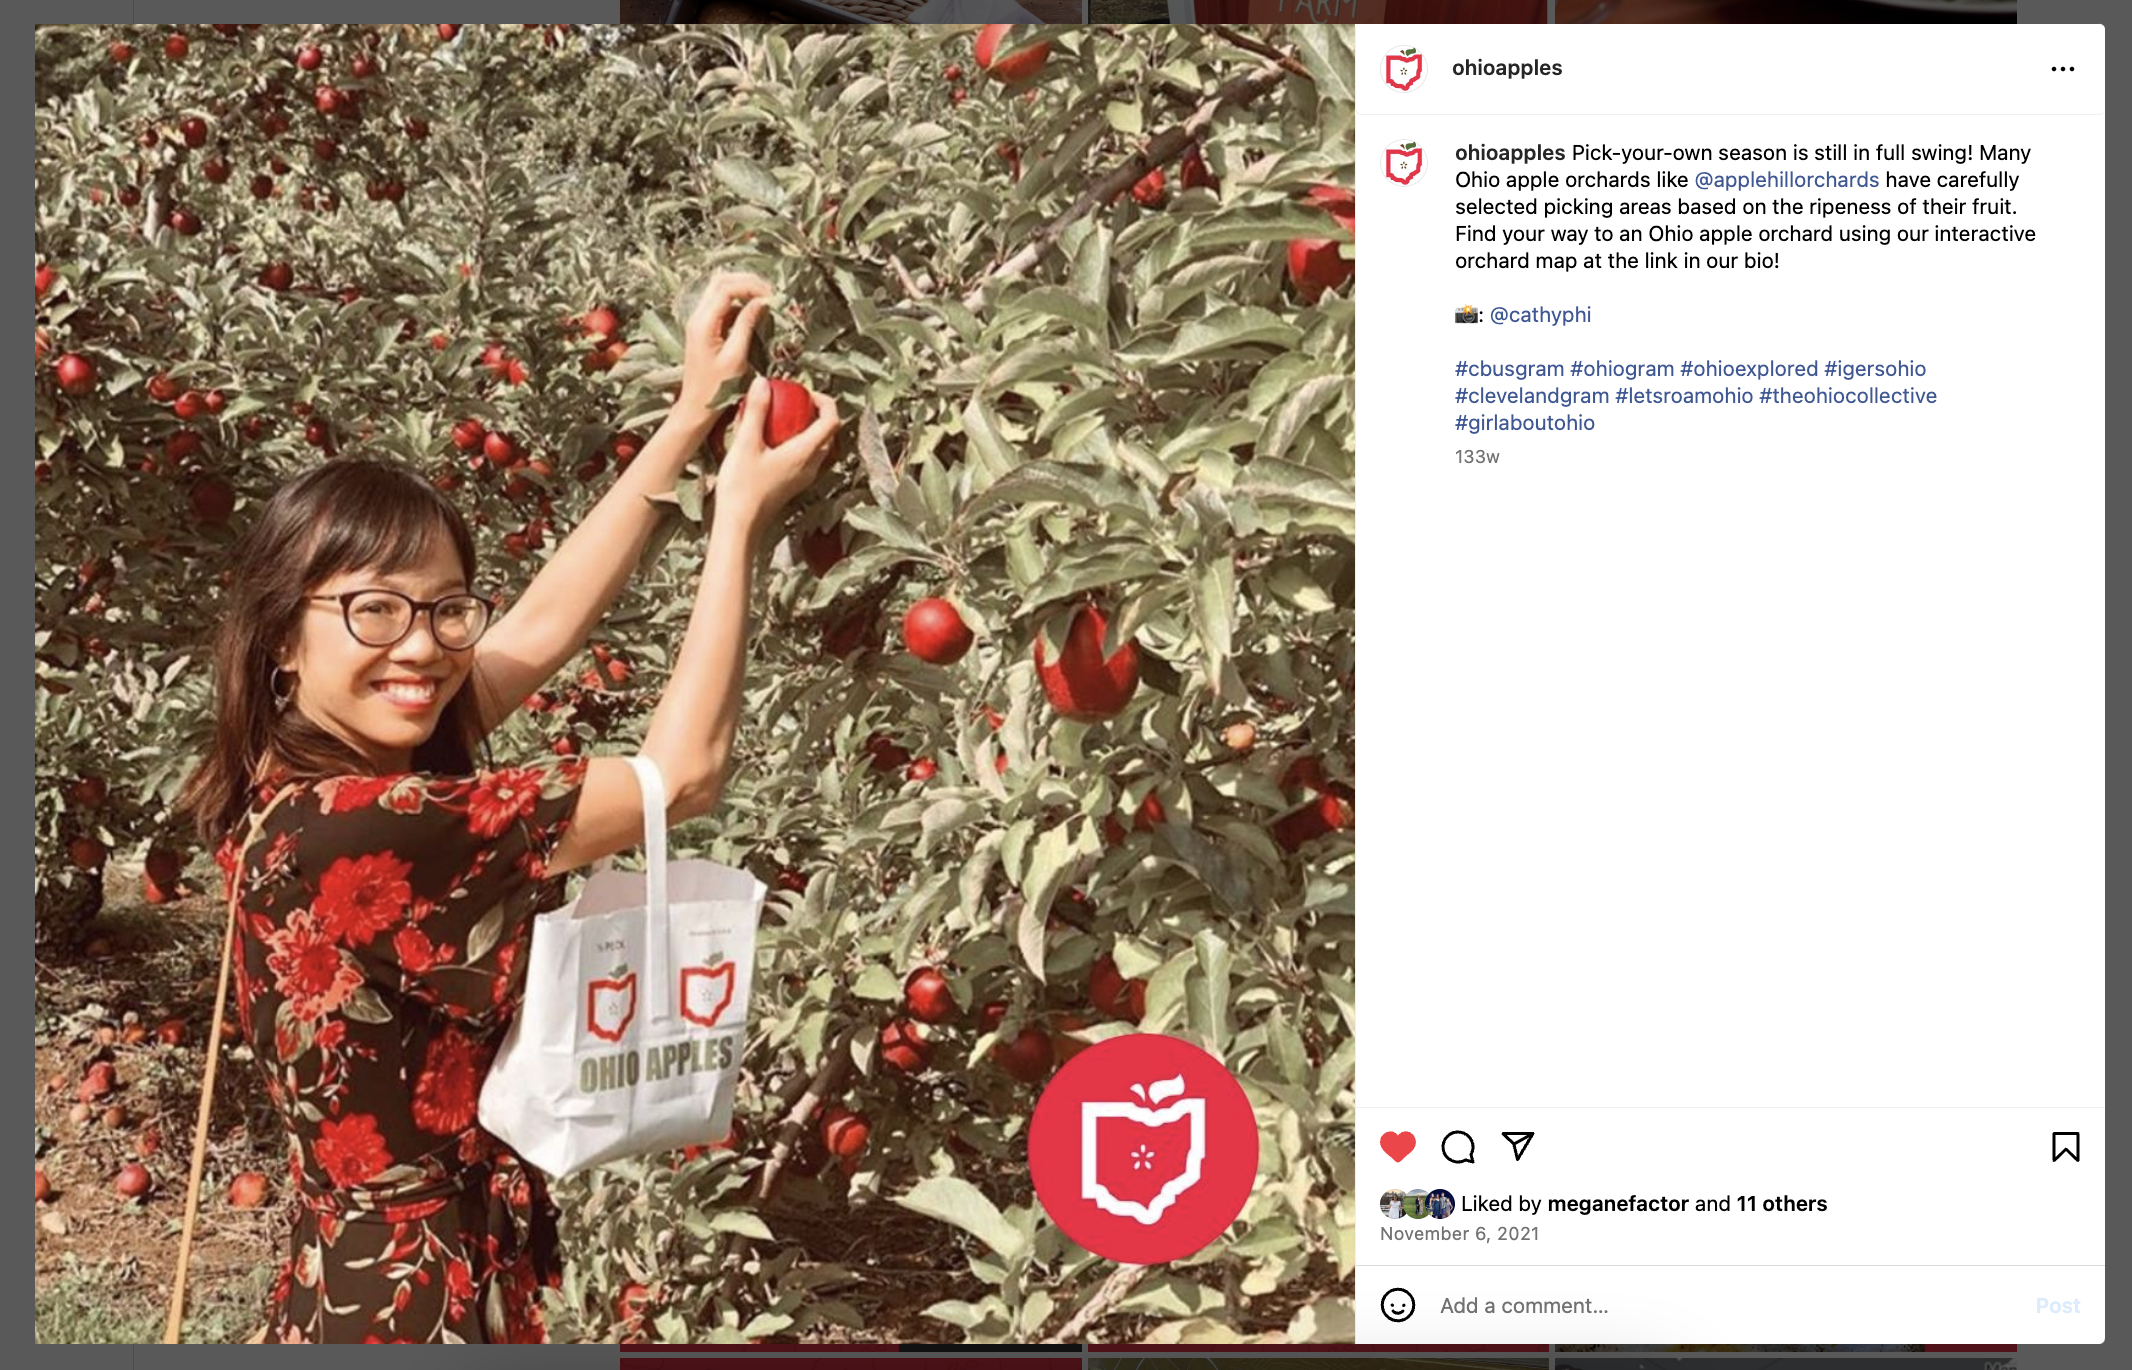 A screenshot of an Instagram post that shows a dark haired woman wearing glasses who is picking apples from a leafy tree.